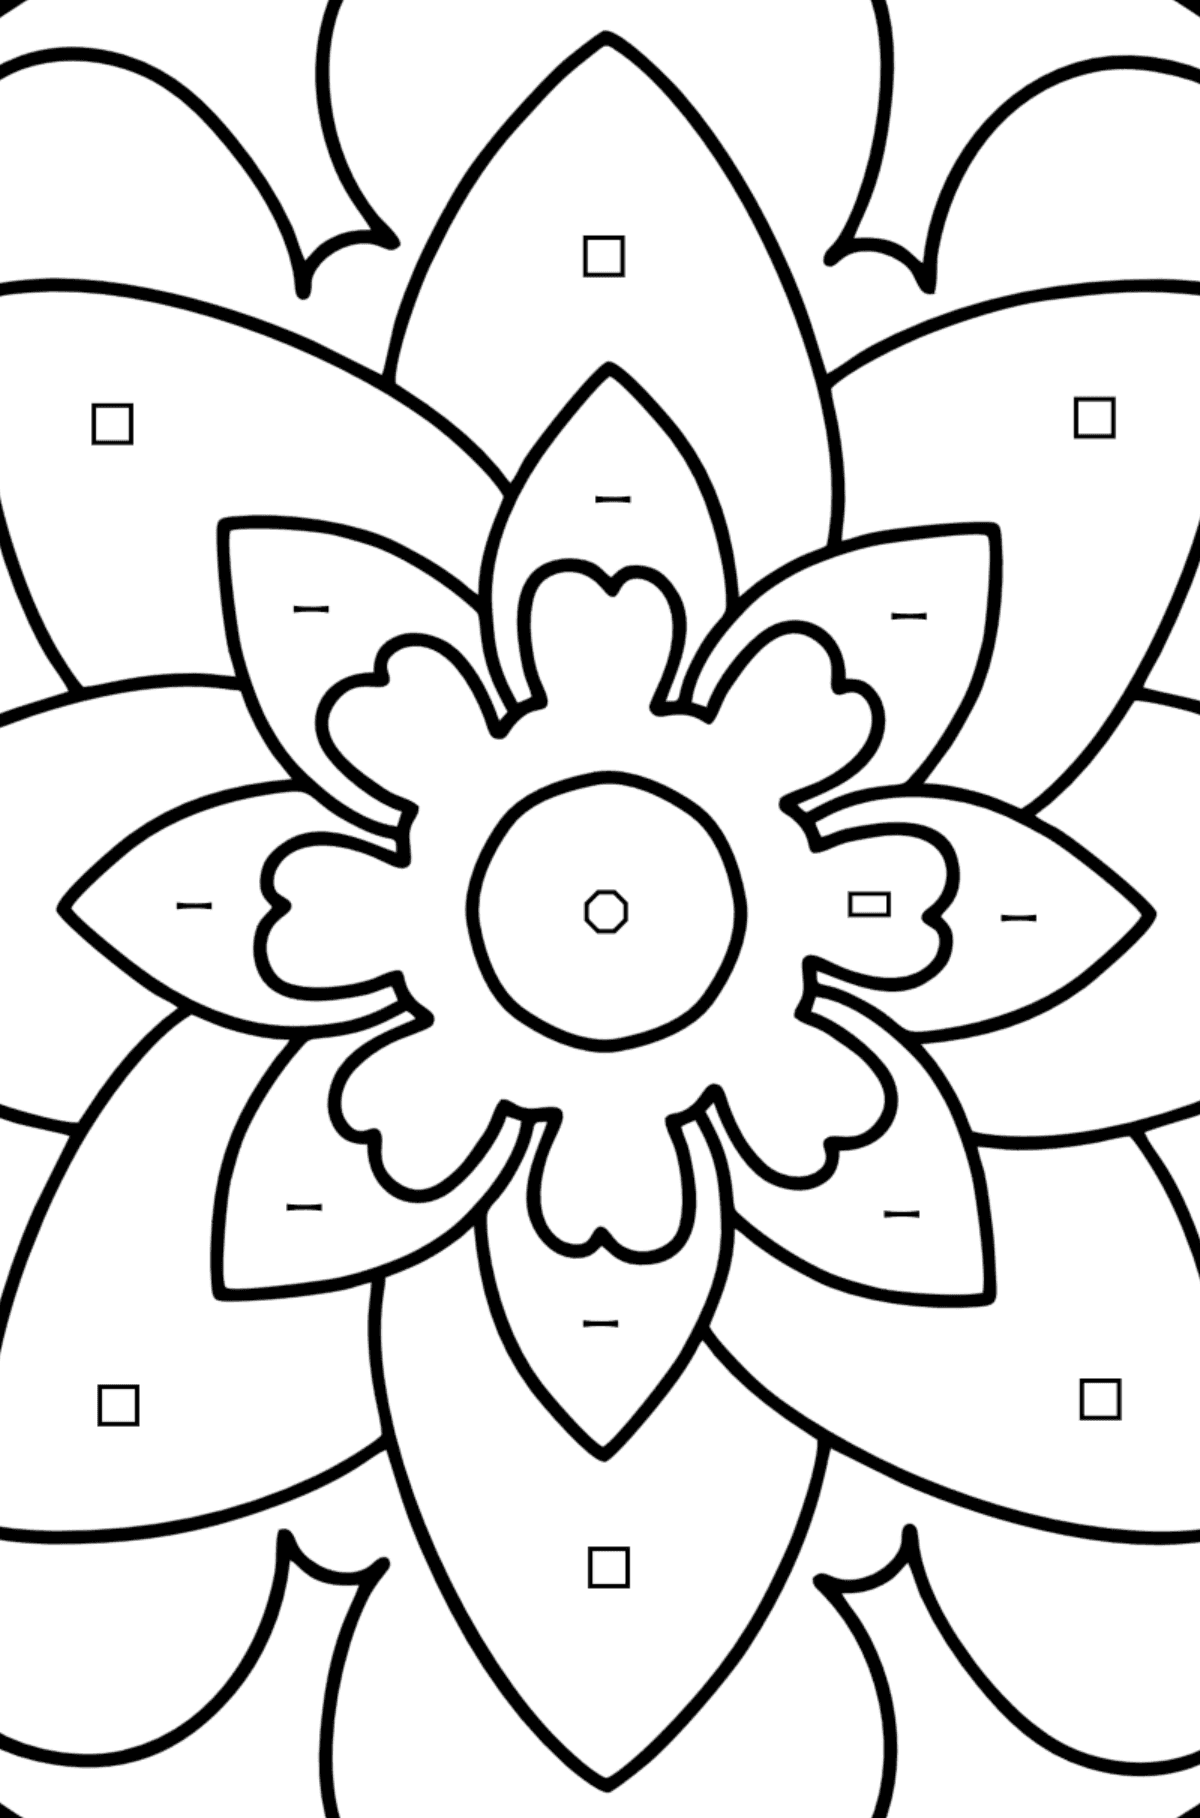 Mandala coloring page - 20 elements - Coloring by Symbols and Geometric Shapes for Kids